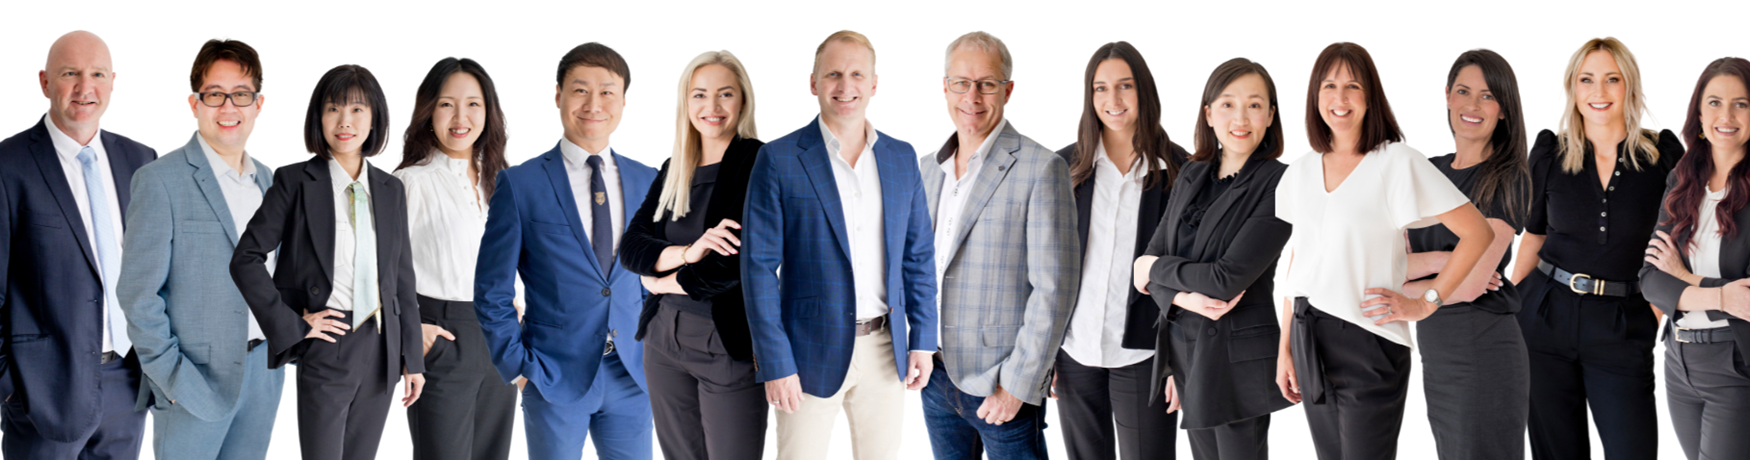 Meet your team of local mortgage experts pic